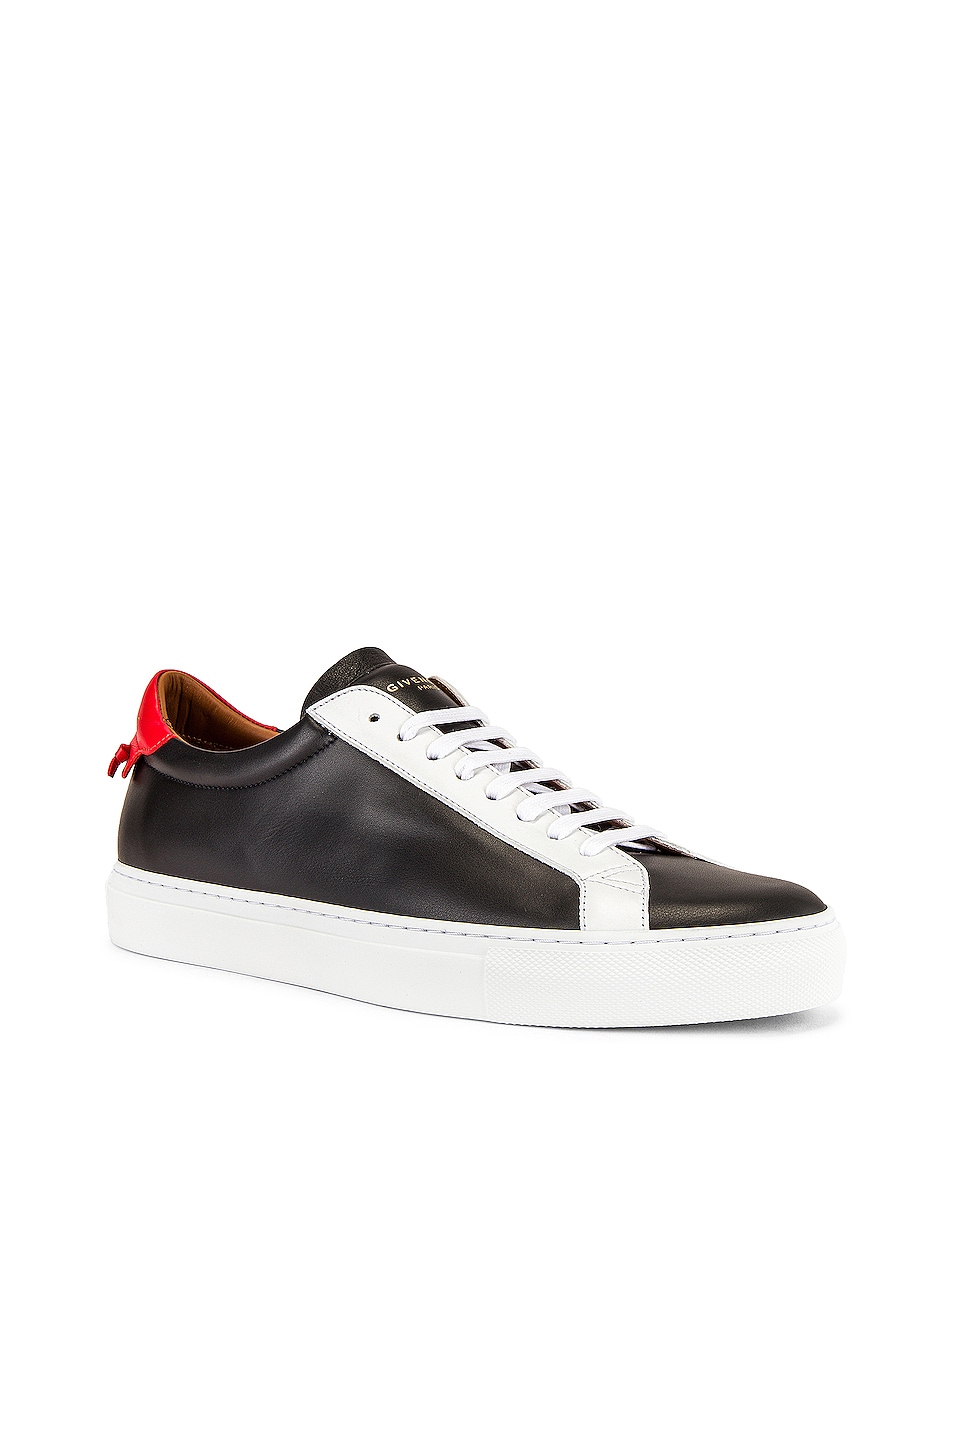 Image 1 of Givenchy Urban Street Low Top Sneaker in Black & Red & White